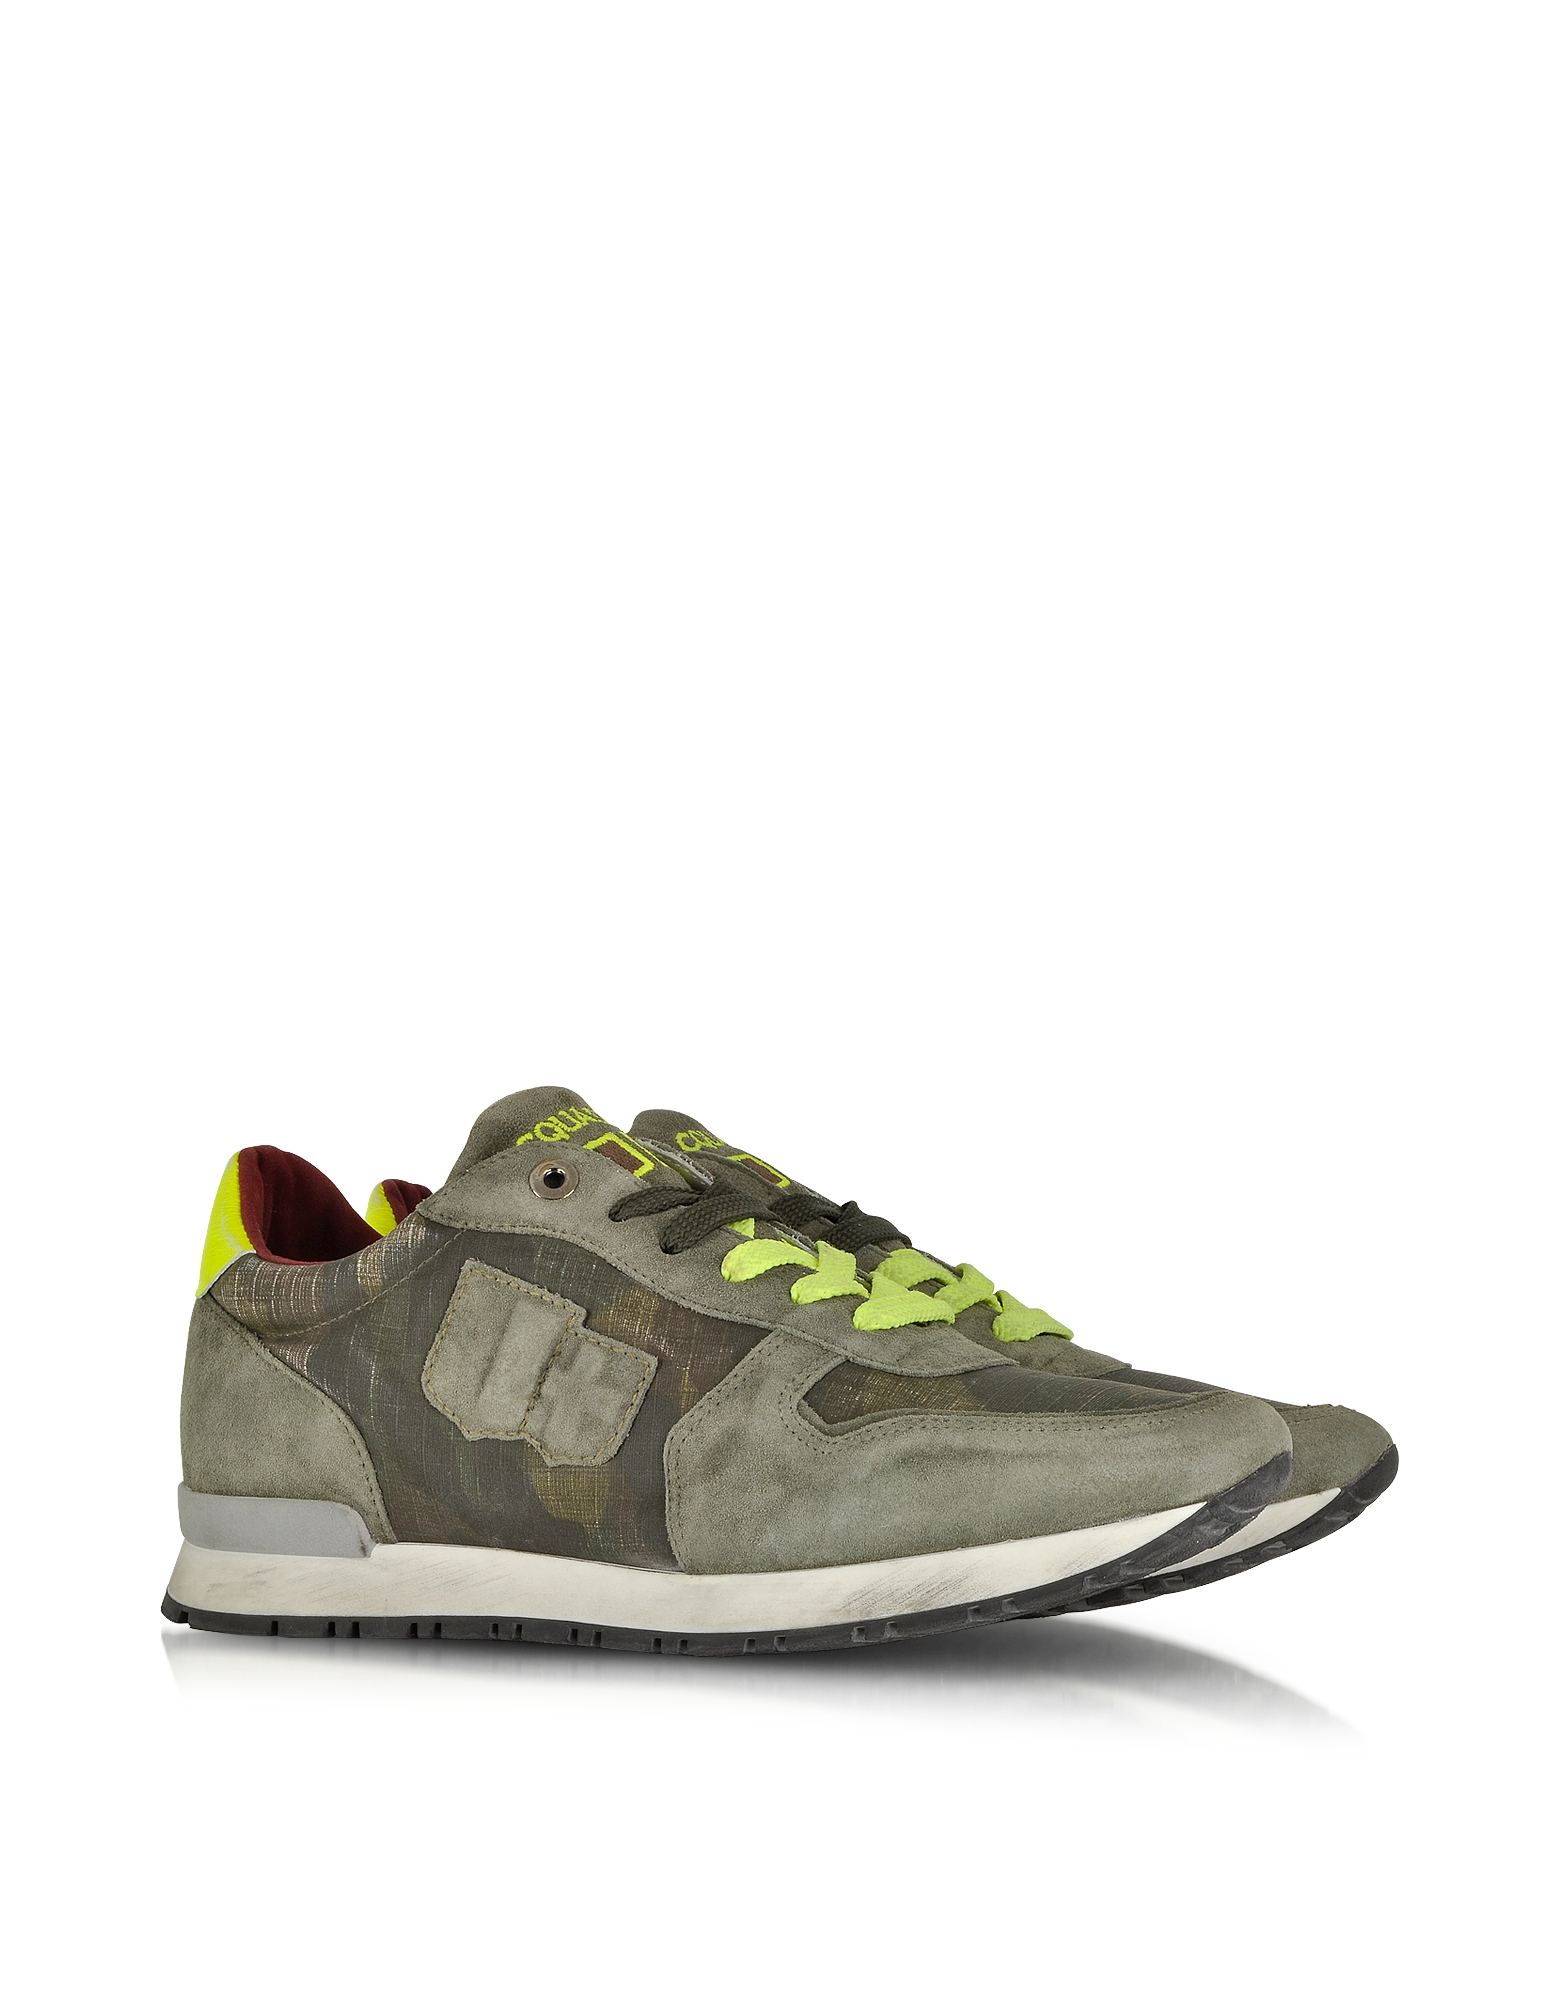 D’acquasparta Botticelli Camouflage Green Suede And Fabric Men's ...